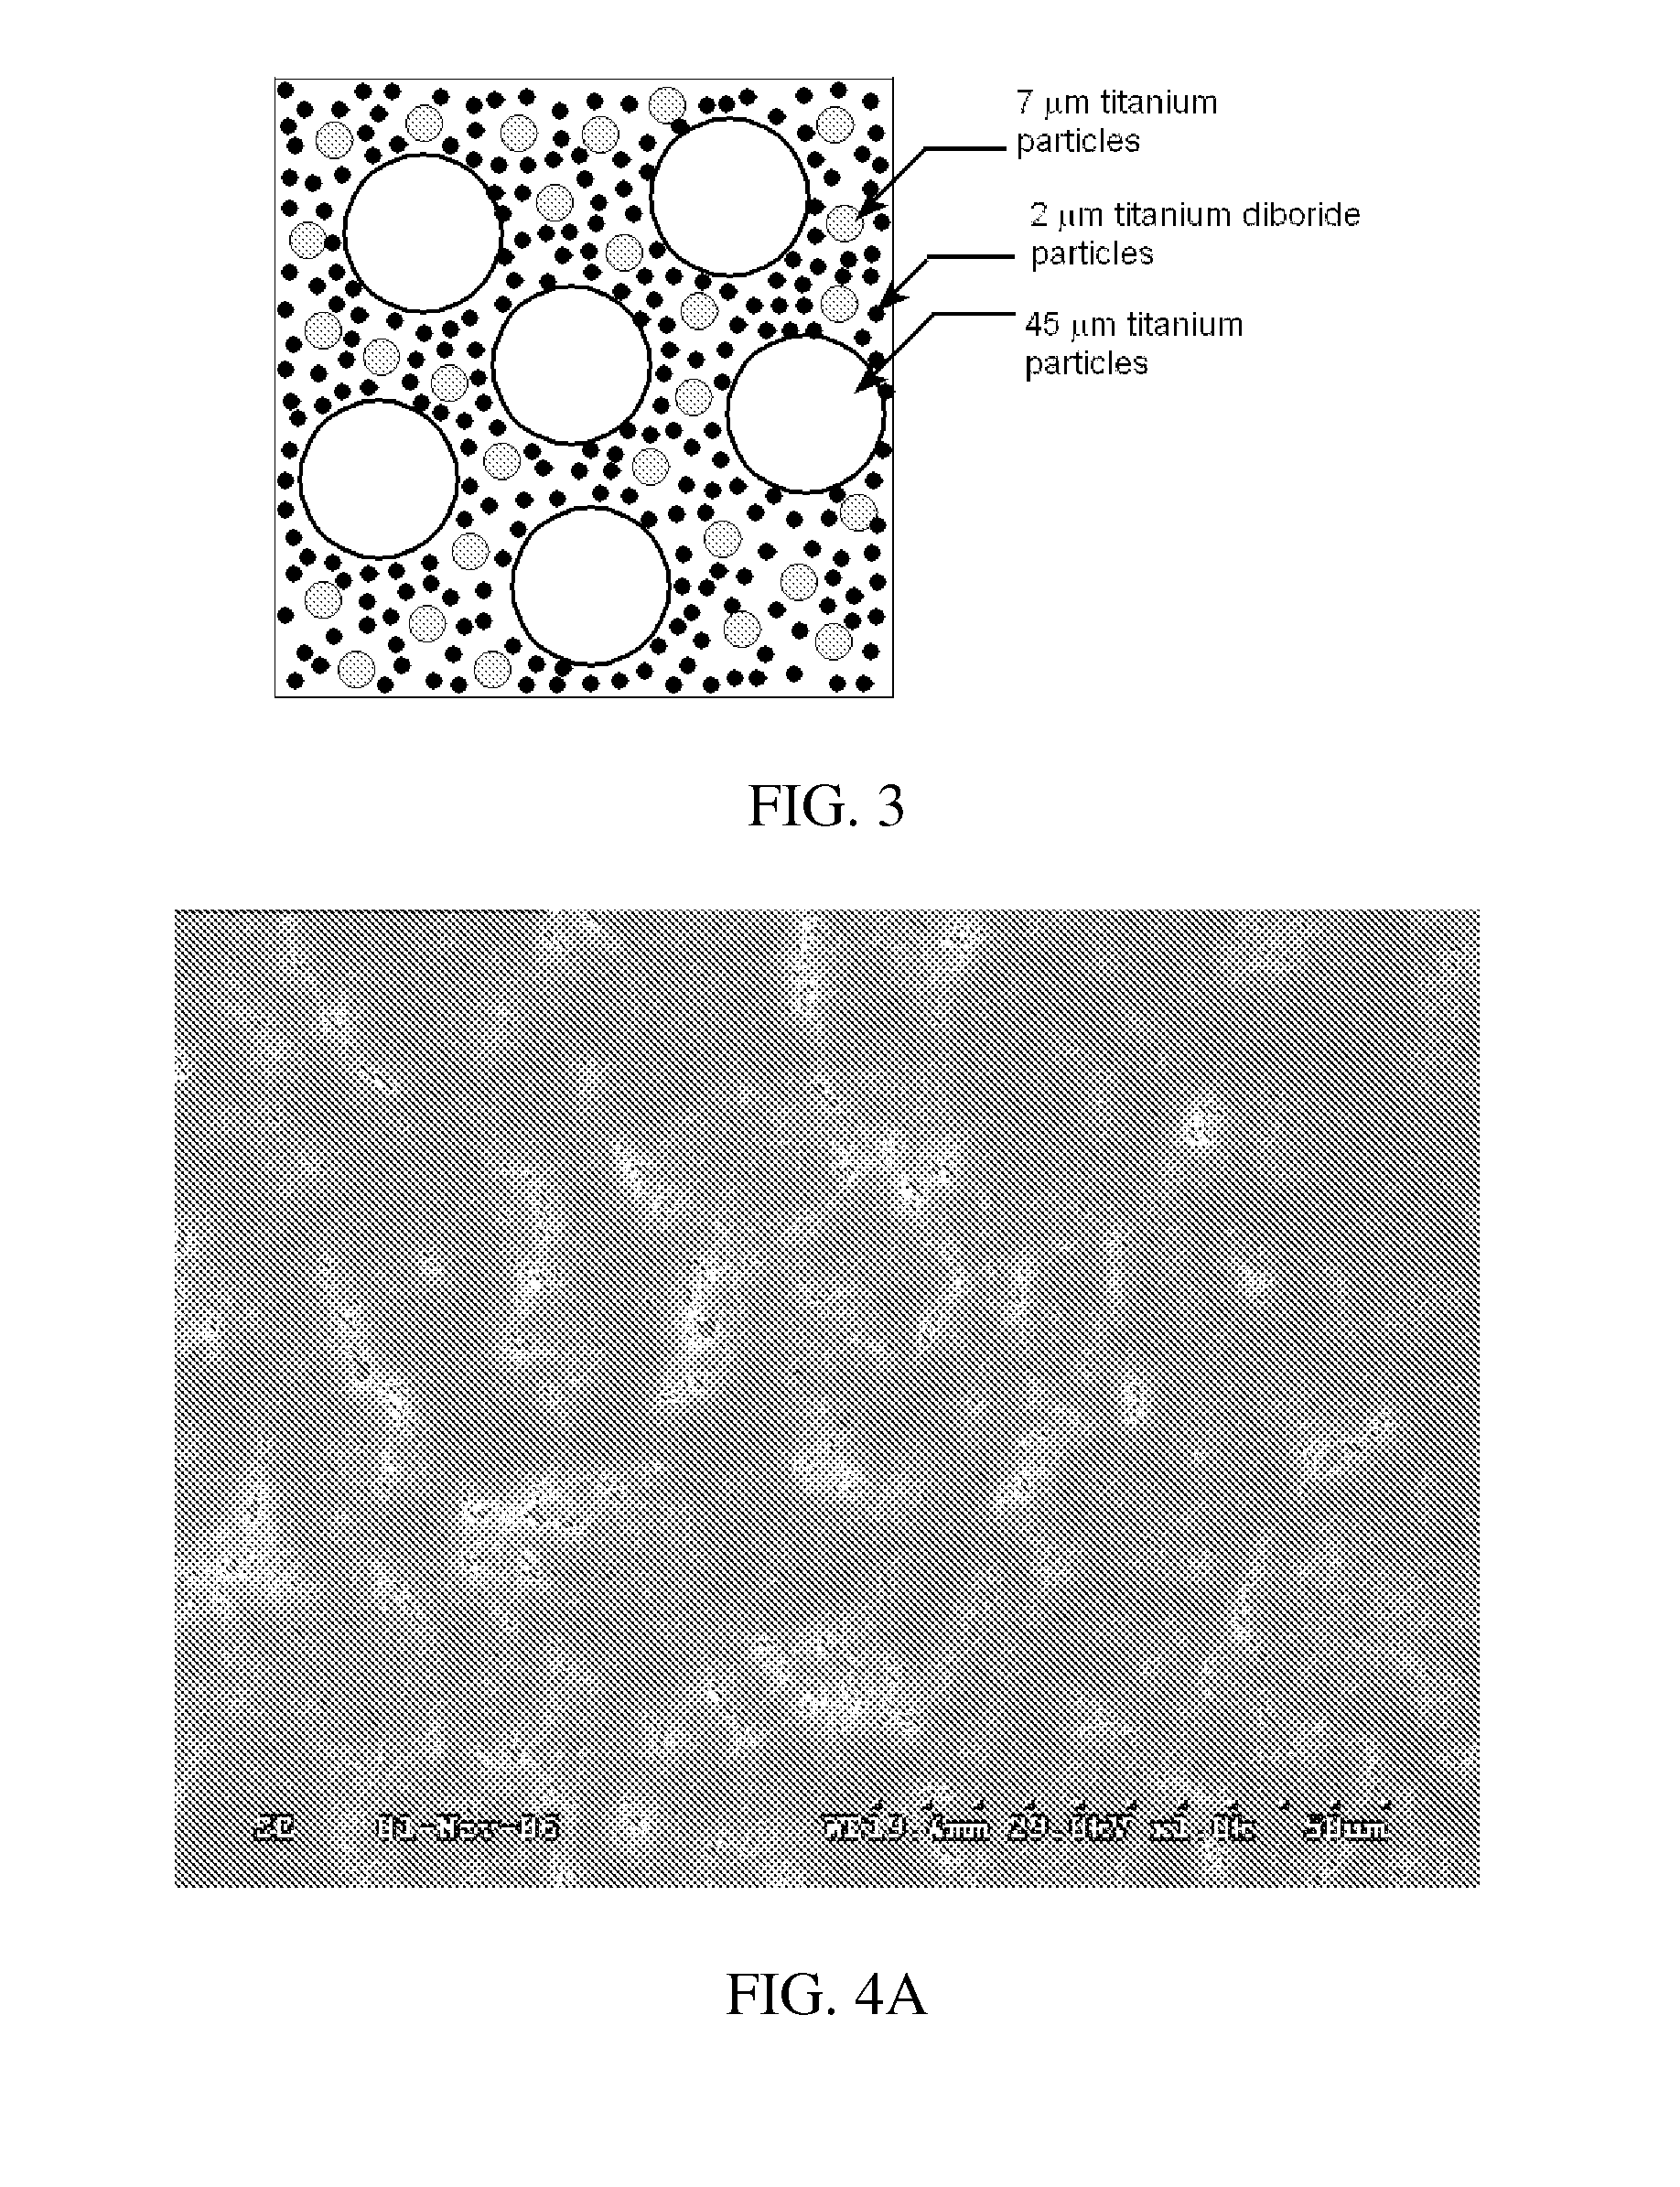 Jewelry having titanium boride compounds and methods of making the same